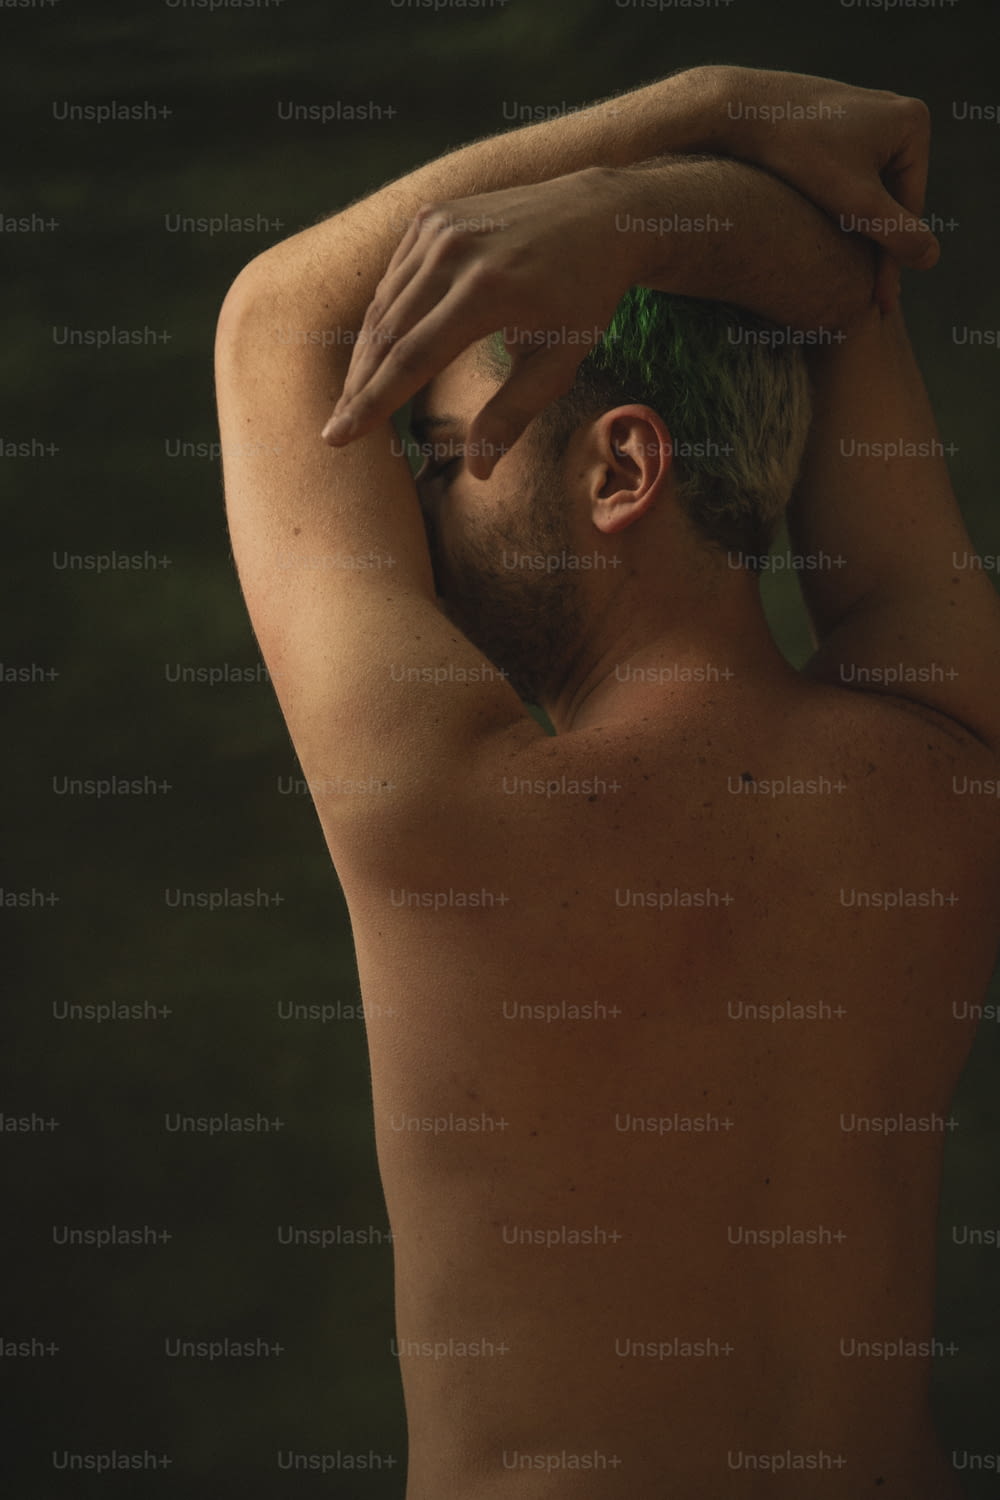 a shirtless man with green hair and no shirt on